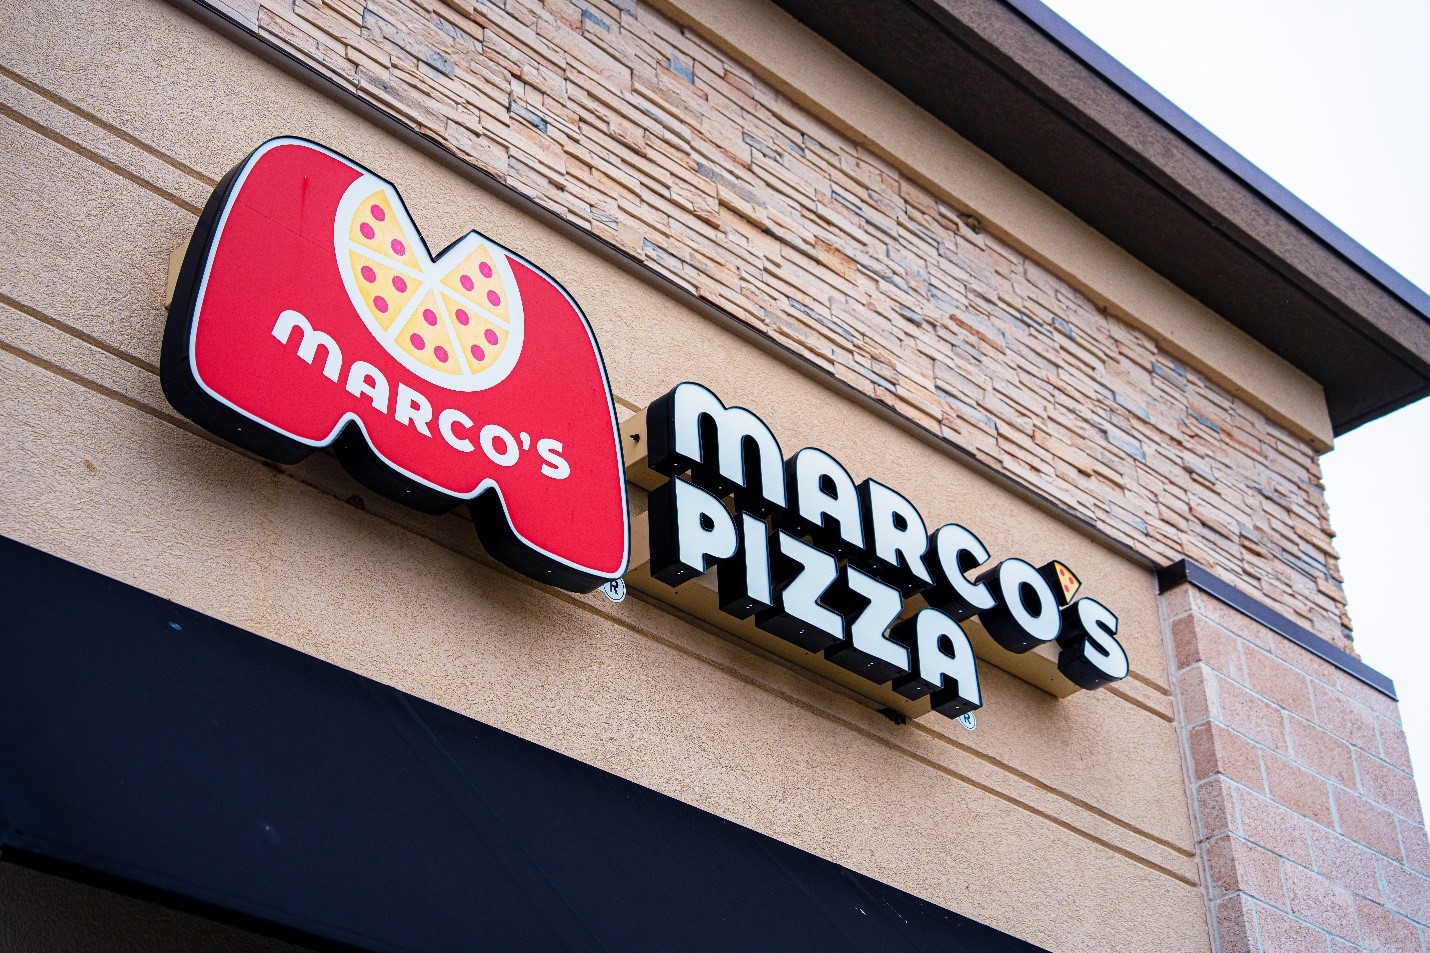 Featured image for “Marco’s Pizza Launches New Brand Platform”